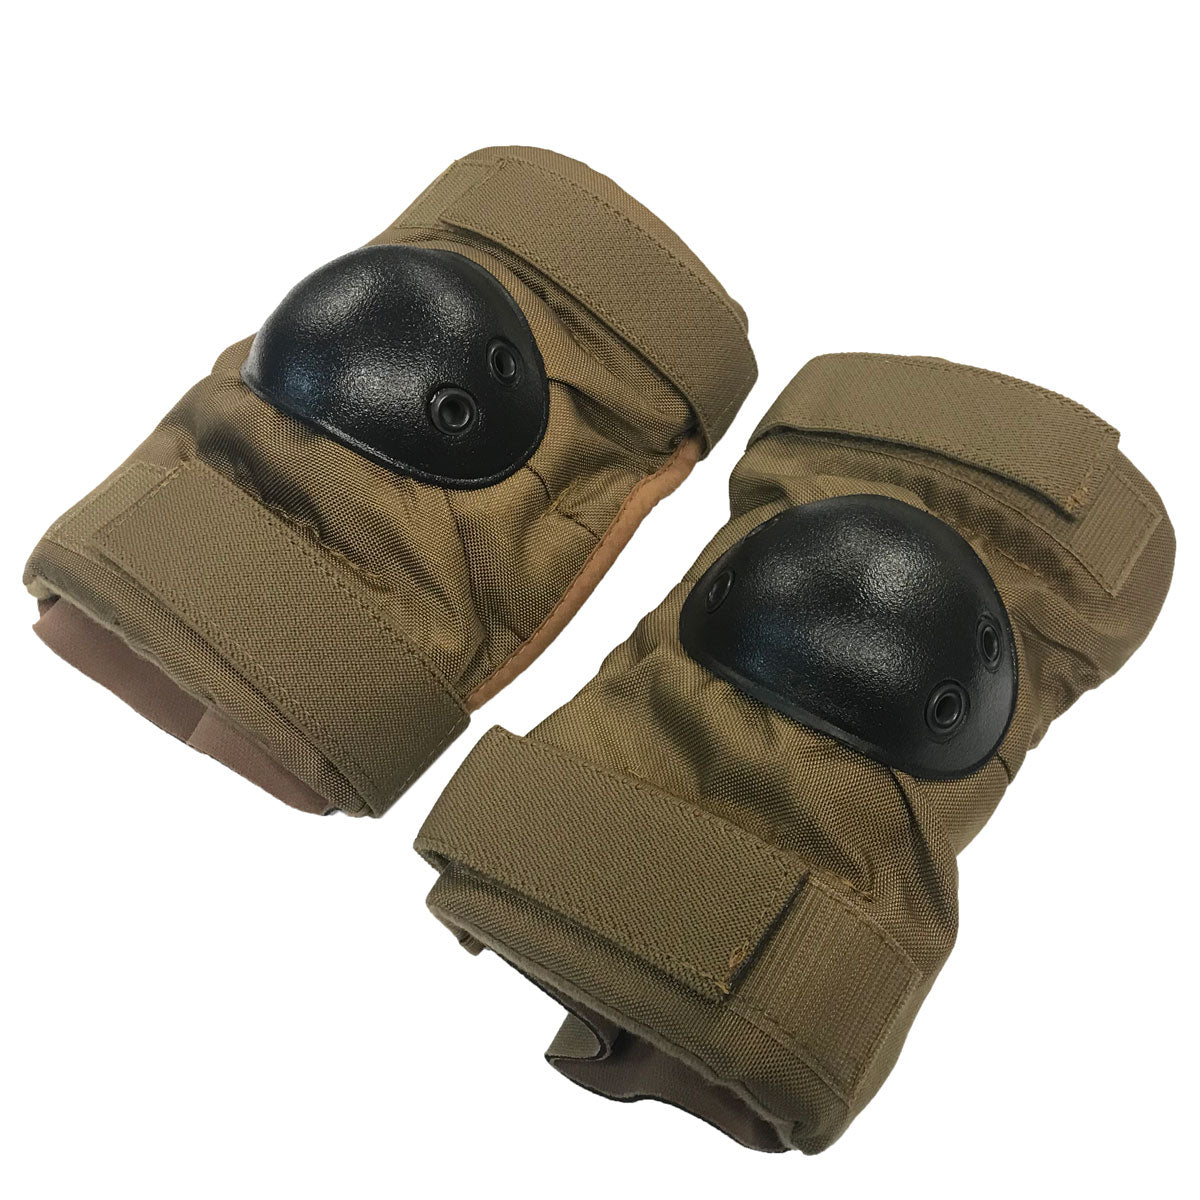 U.S. Military Issue Tactical Elbow Pads